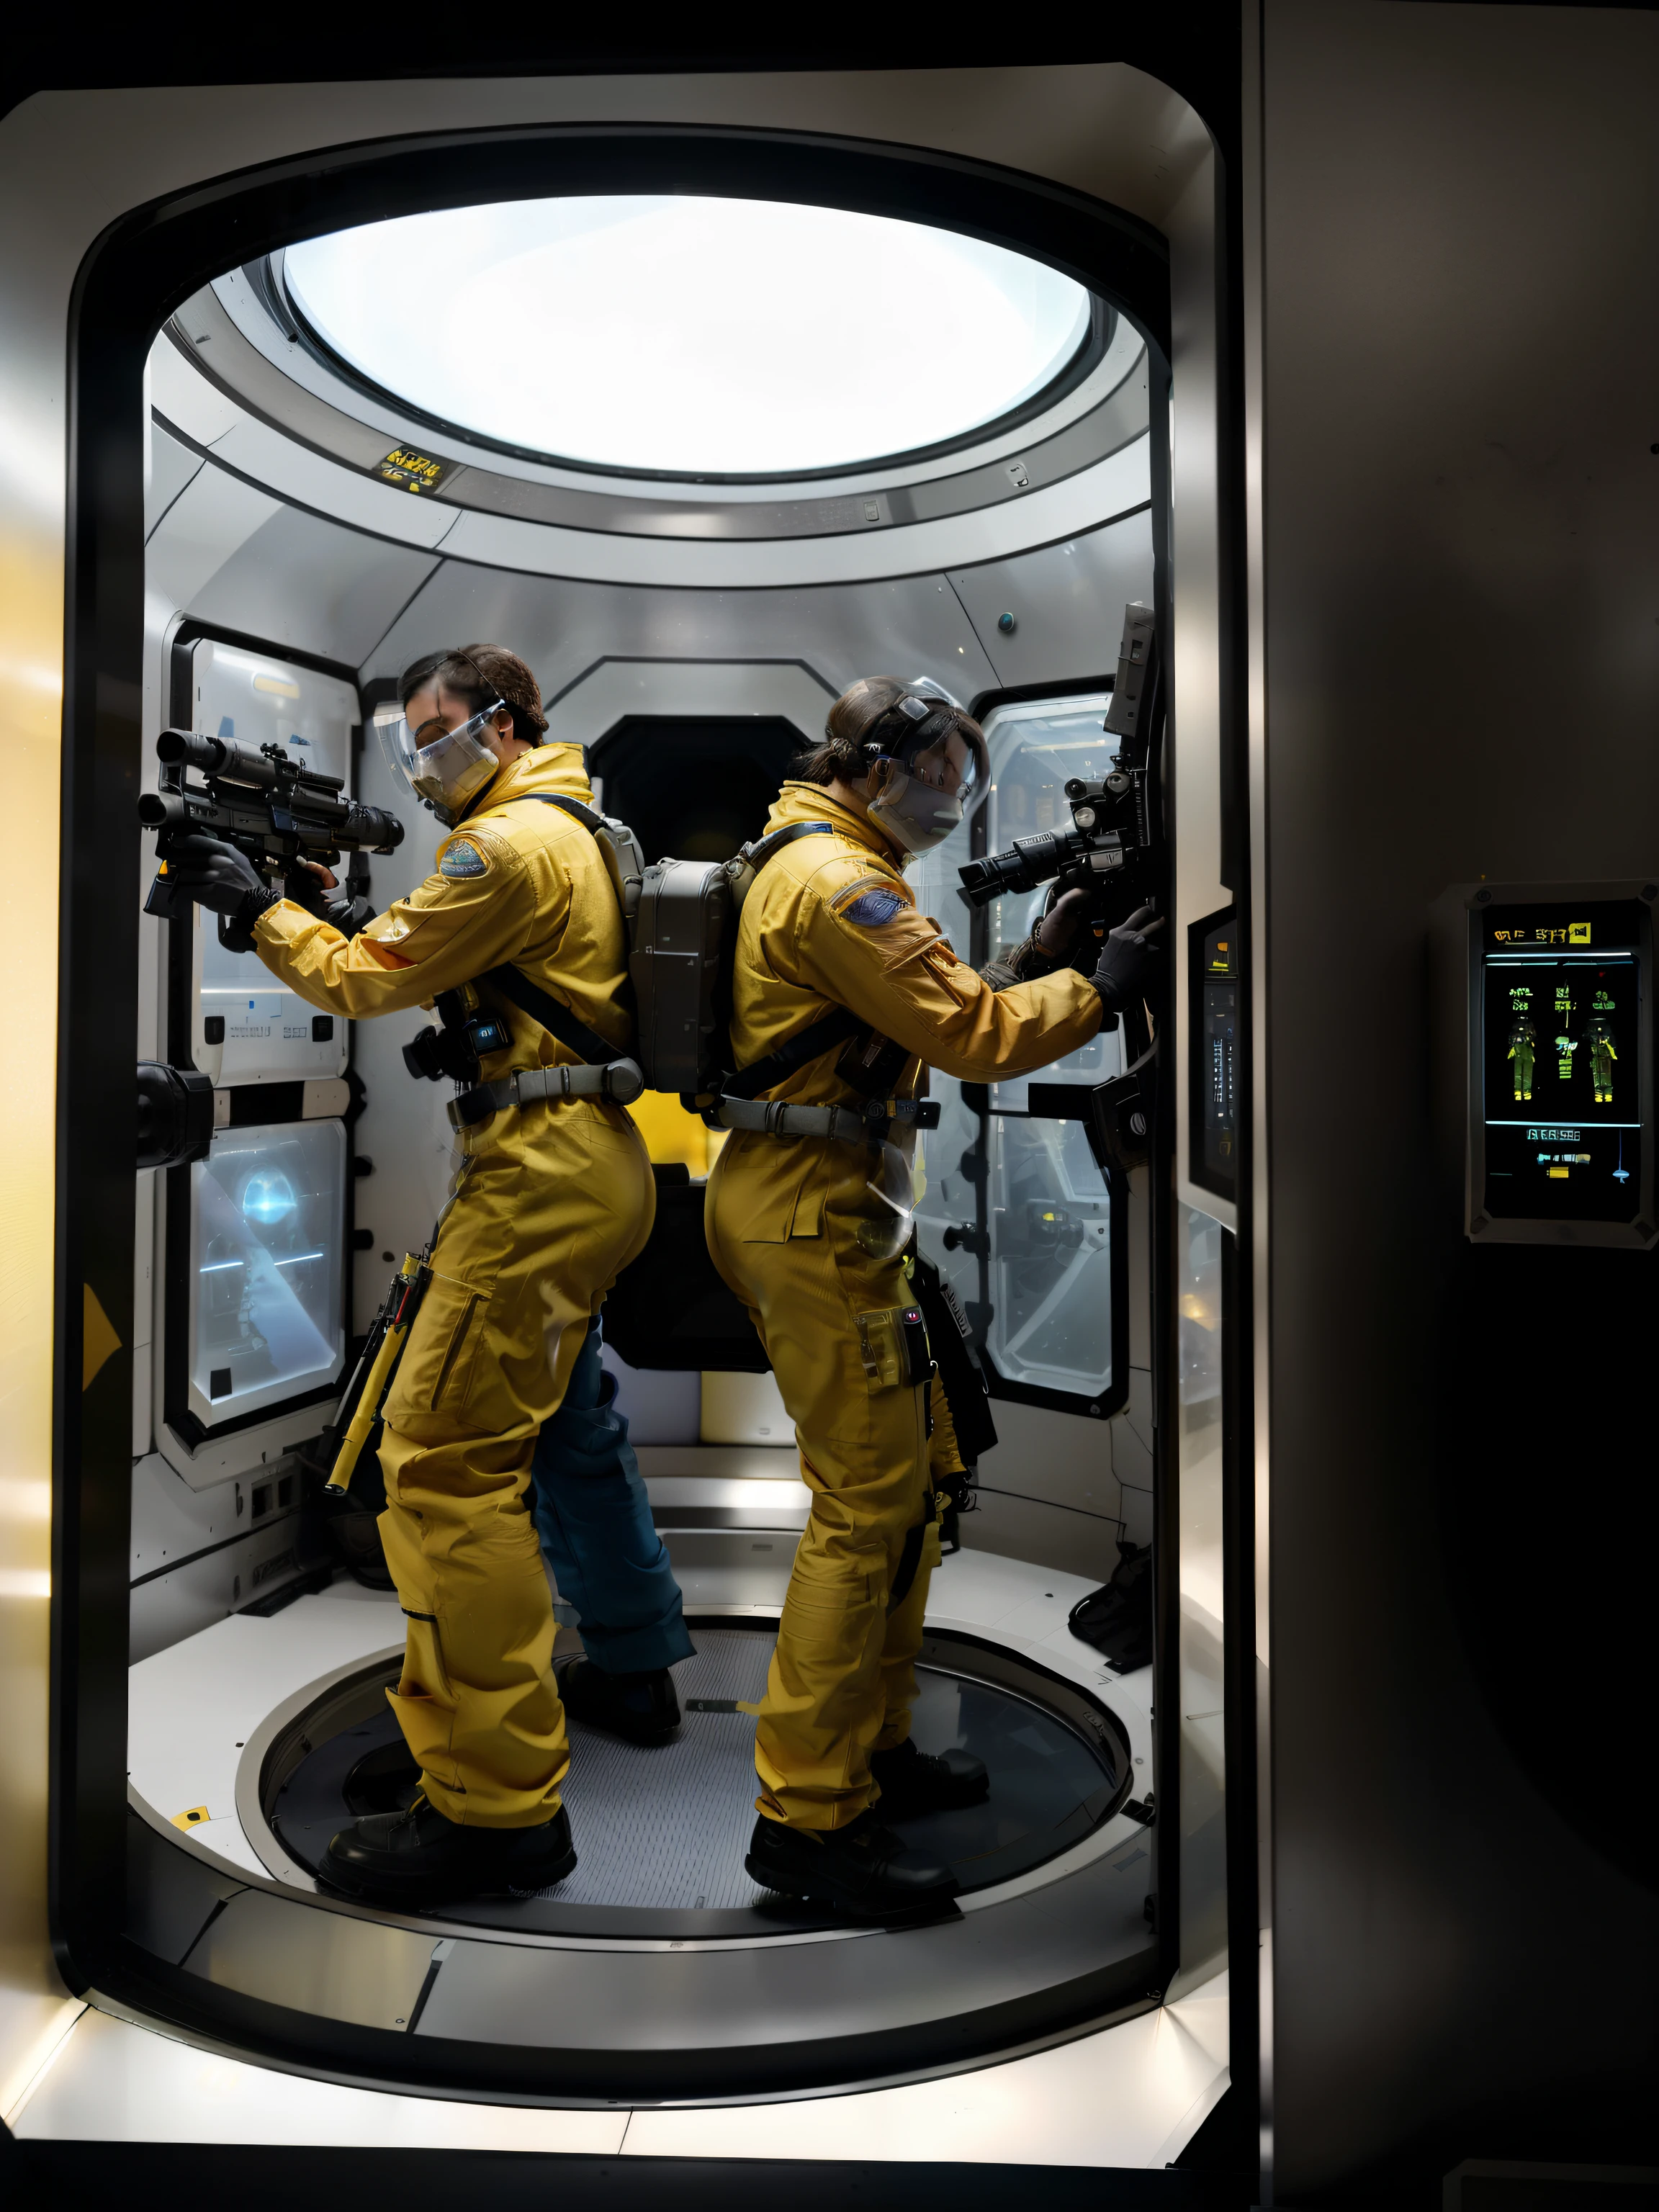 there are two people in a space station with guns, science fiction space suit, futuristic elevator, yellow flight suits, depicted as a scifi scene, fully space suited, terrorists in a space station, modern space coverall, in a space horror setting, futuristic mechanic suits, dusty space suit, futuristic starship crew members, hazmat suits